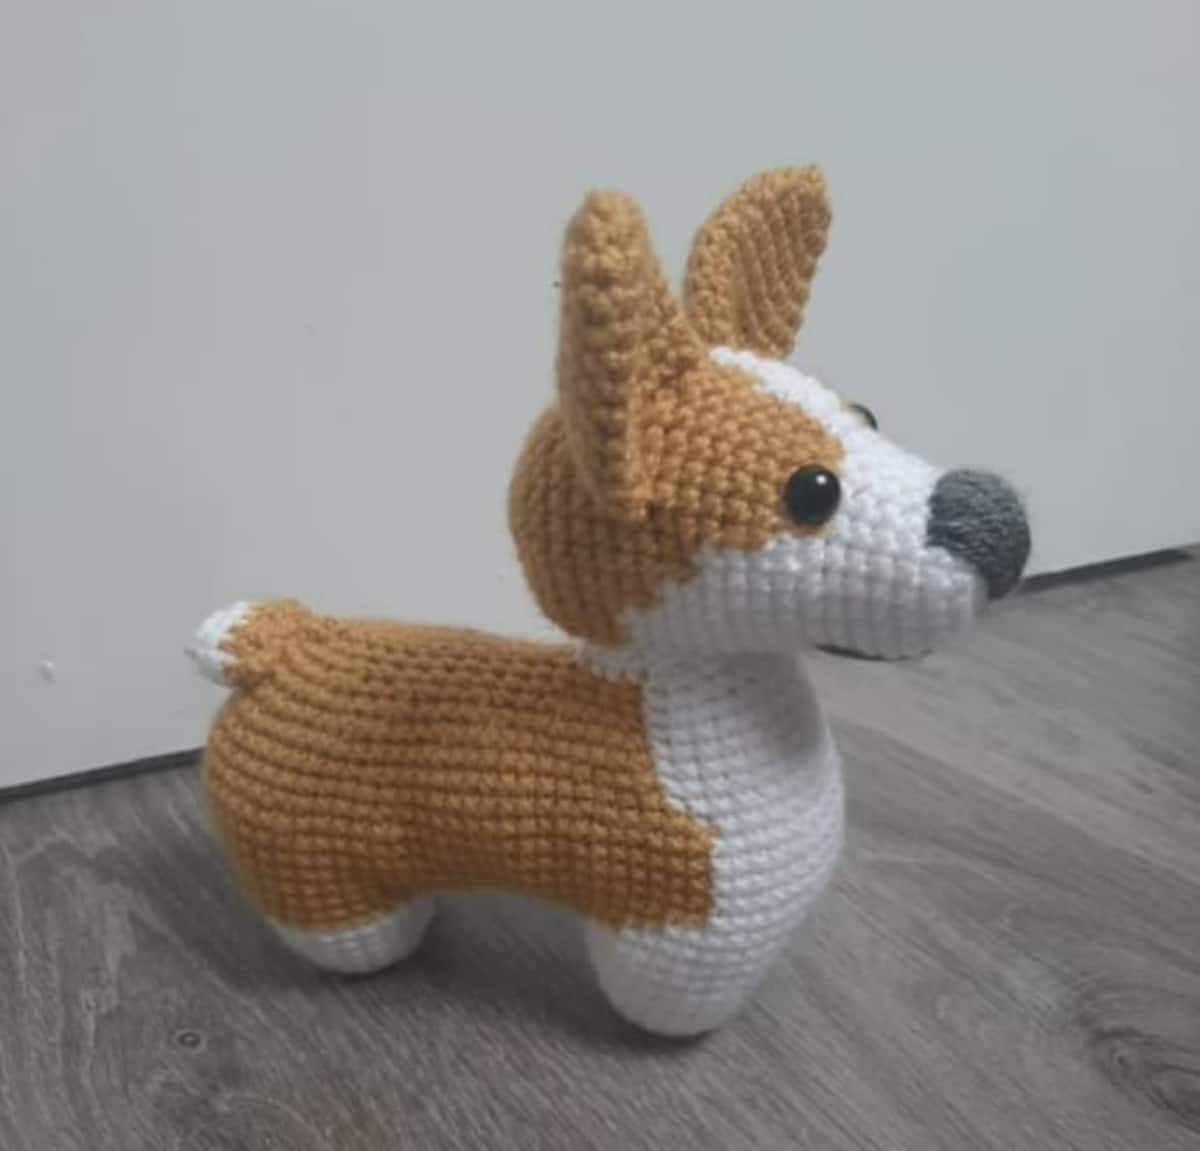 Crochet stuffed Corgi facing sideways with a brown back and ears and a white face and body standing on a wooden floor.